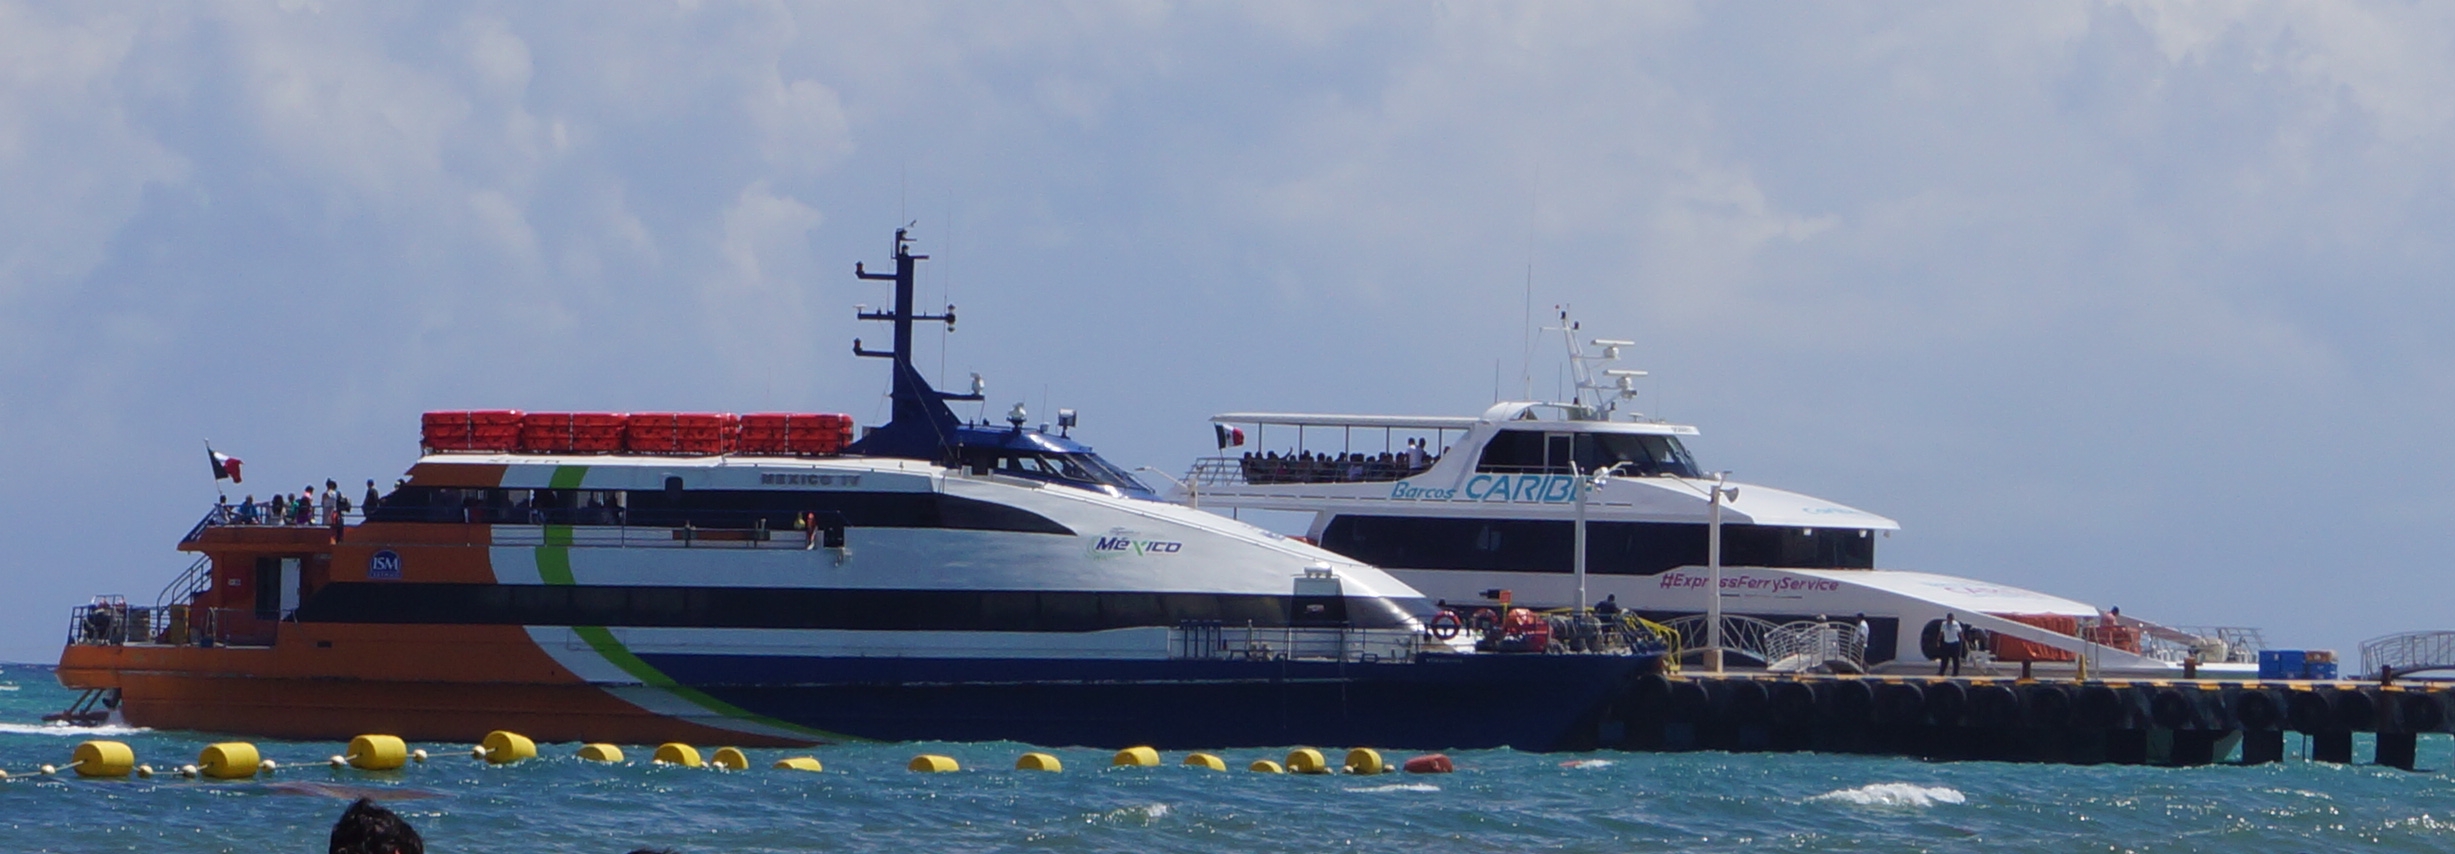 Two ferries parked at dock in Playa Del Carmen.